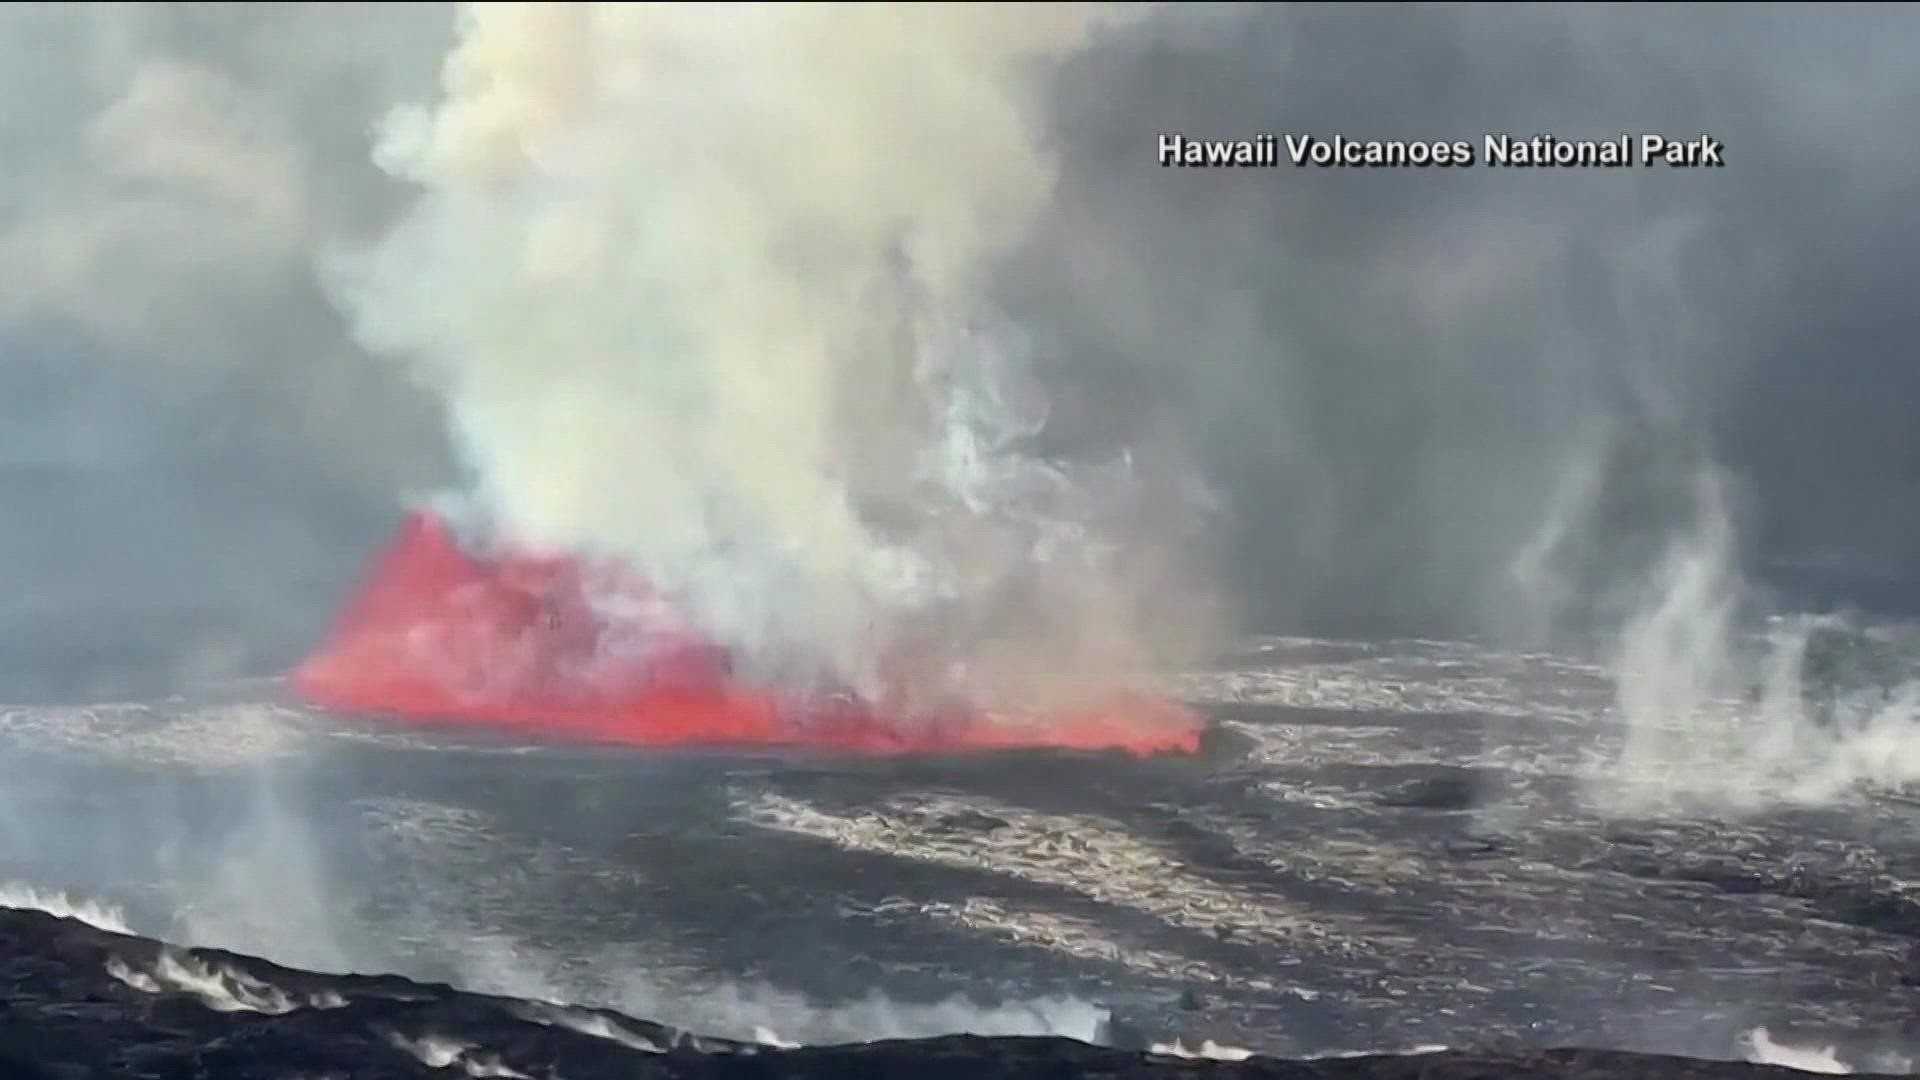 Hawaii's Kilauea volcano last erupted for 16 months starting in September 2021.